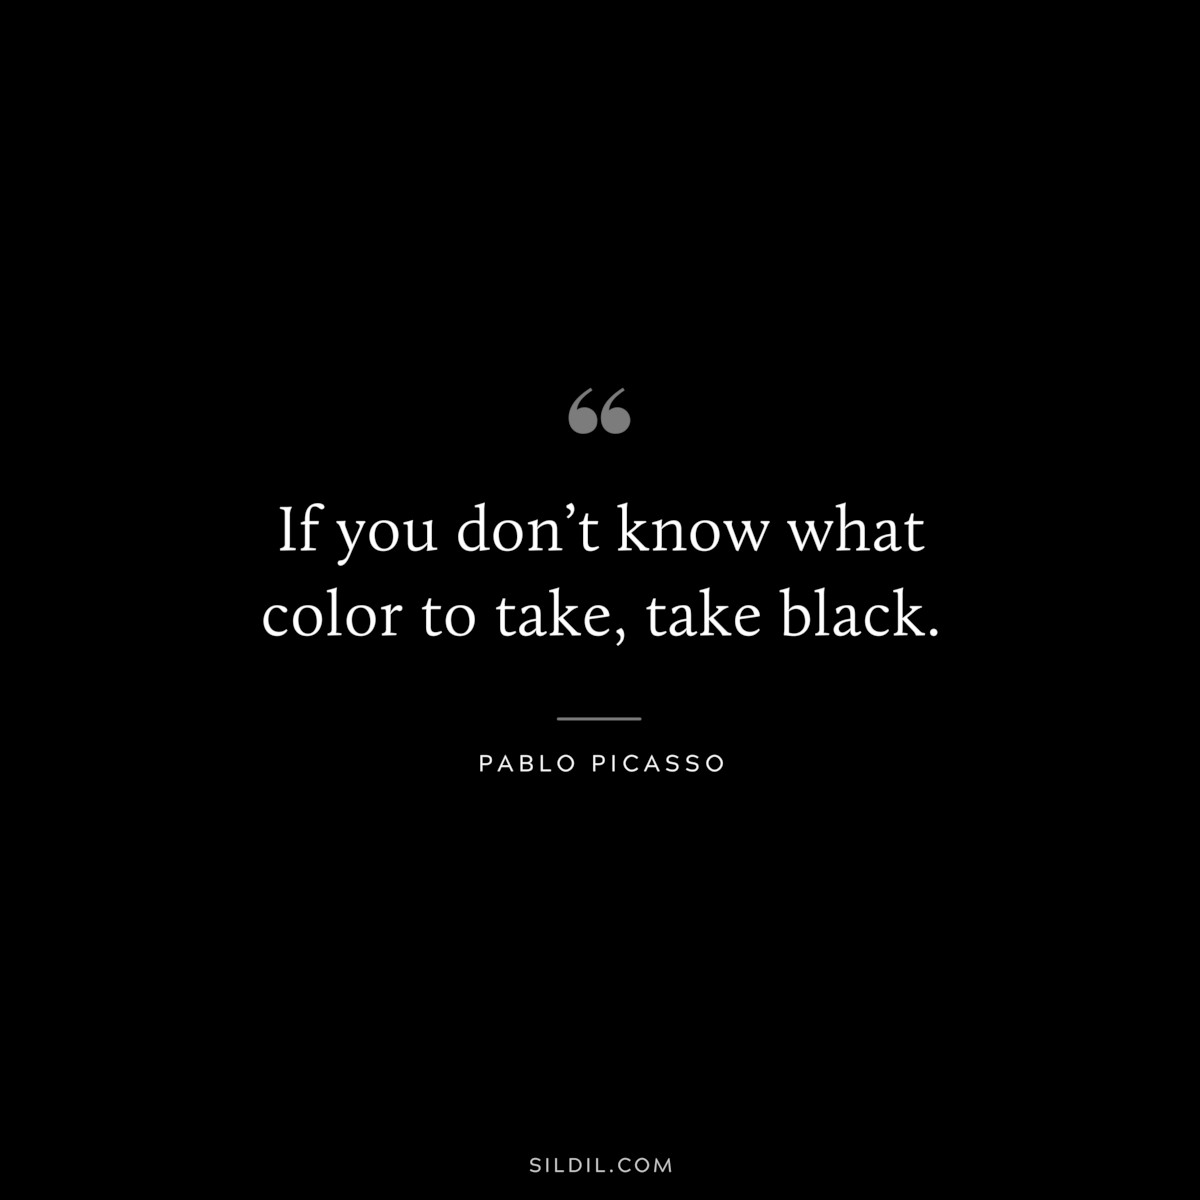 If you don’t know what color to take, take black. ― Pablo Picasso